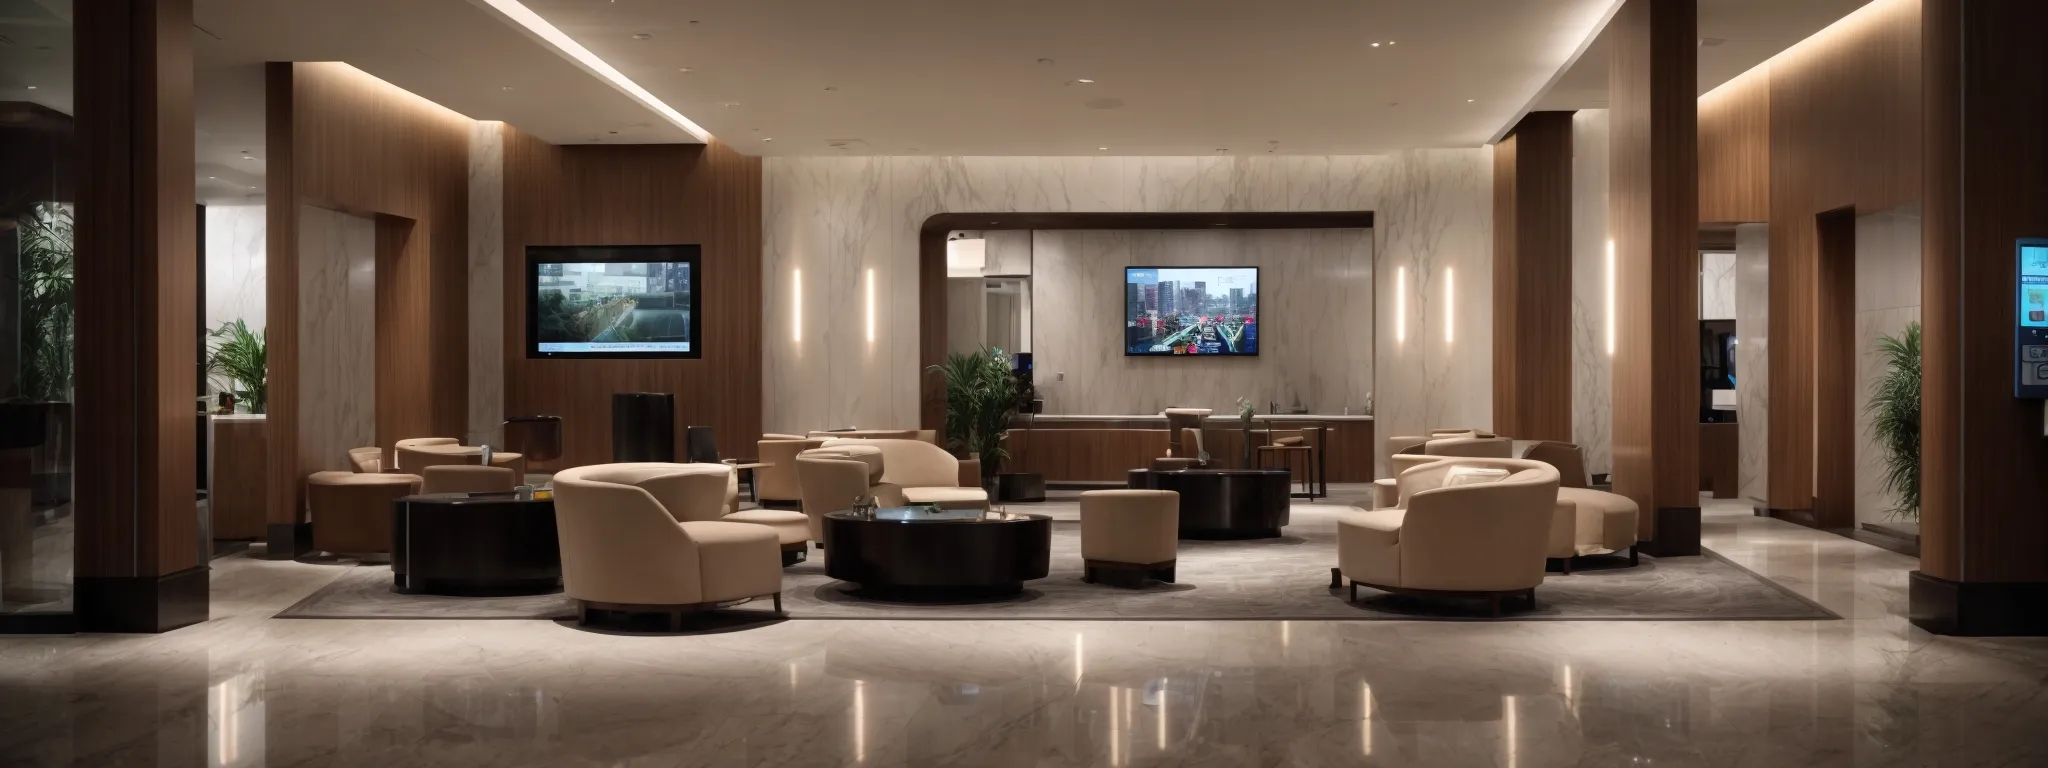 a sleek hotel lobby featuring interactive touchscreens and a robotic assistant greeting guests.